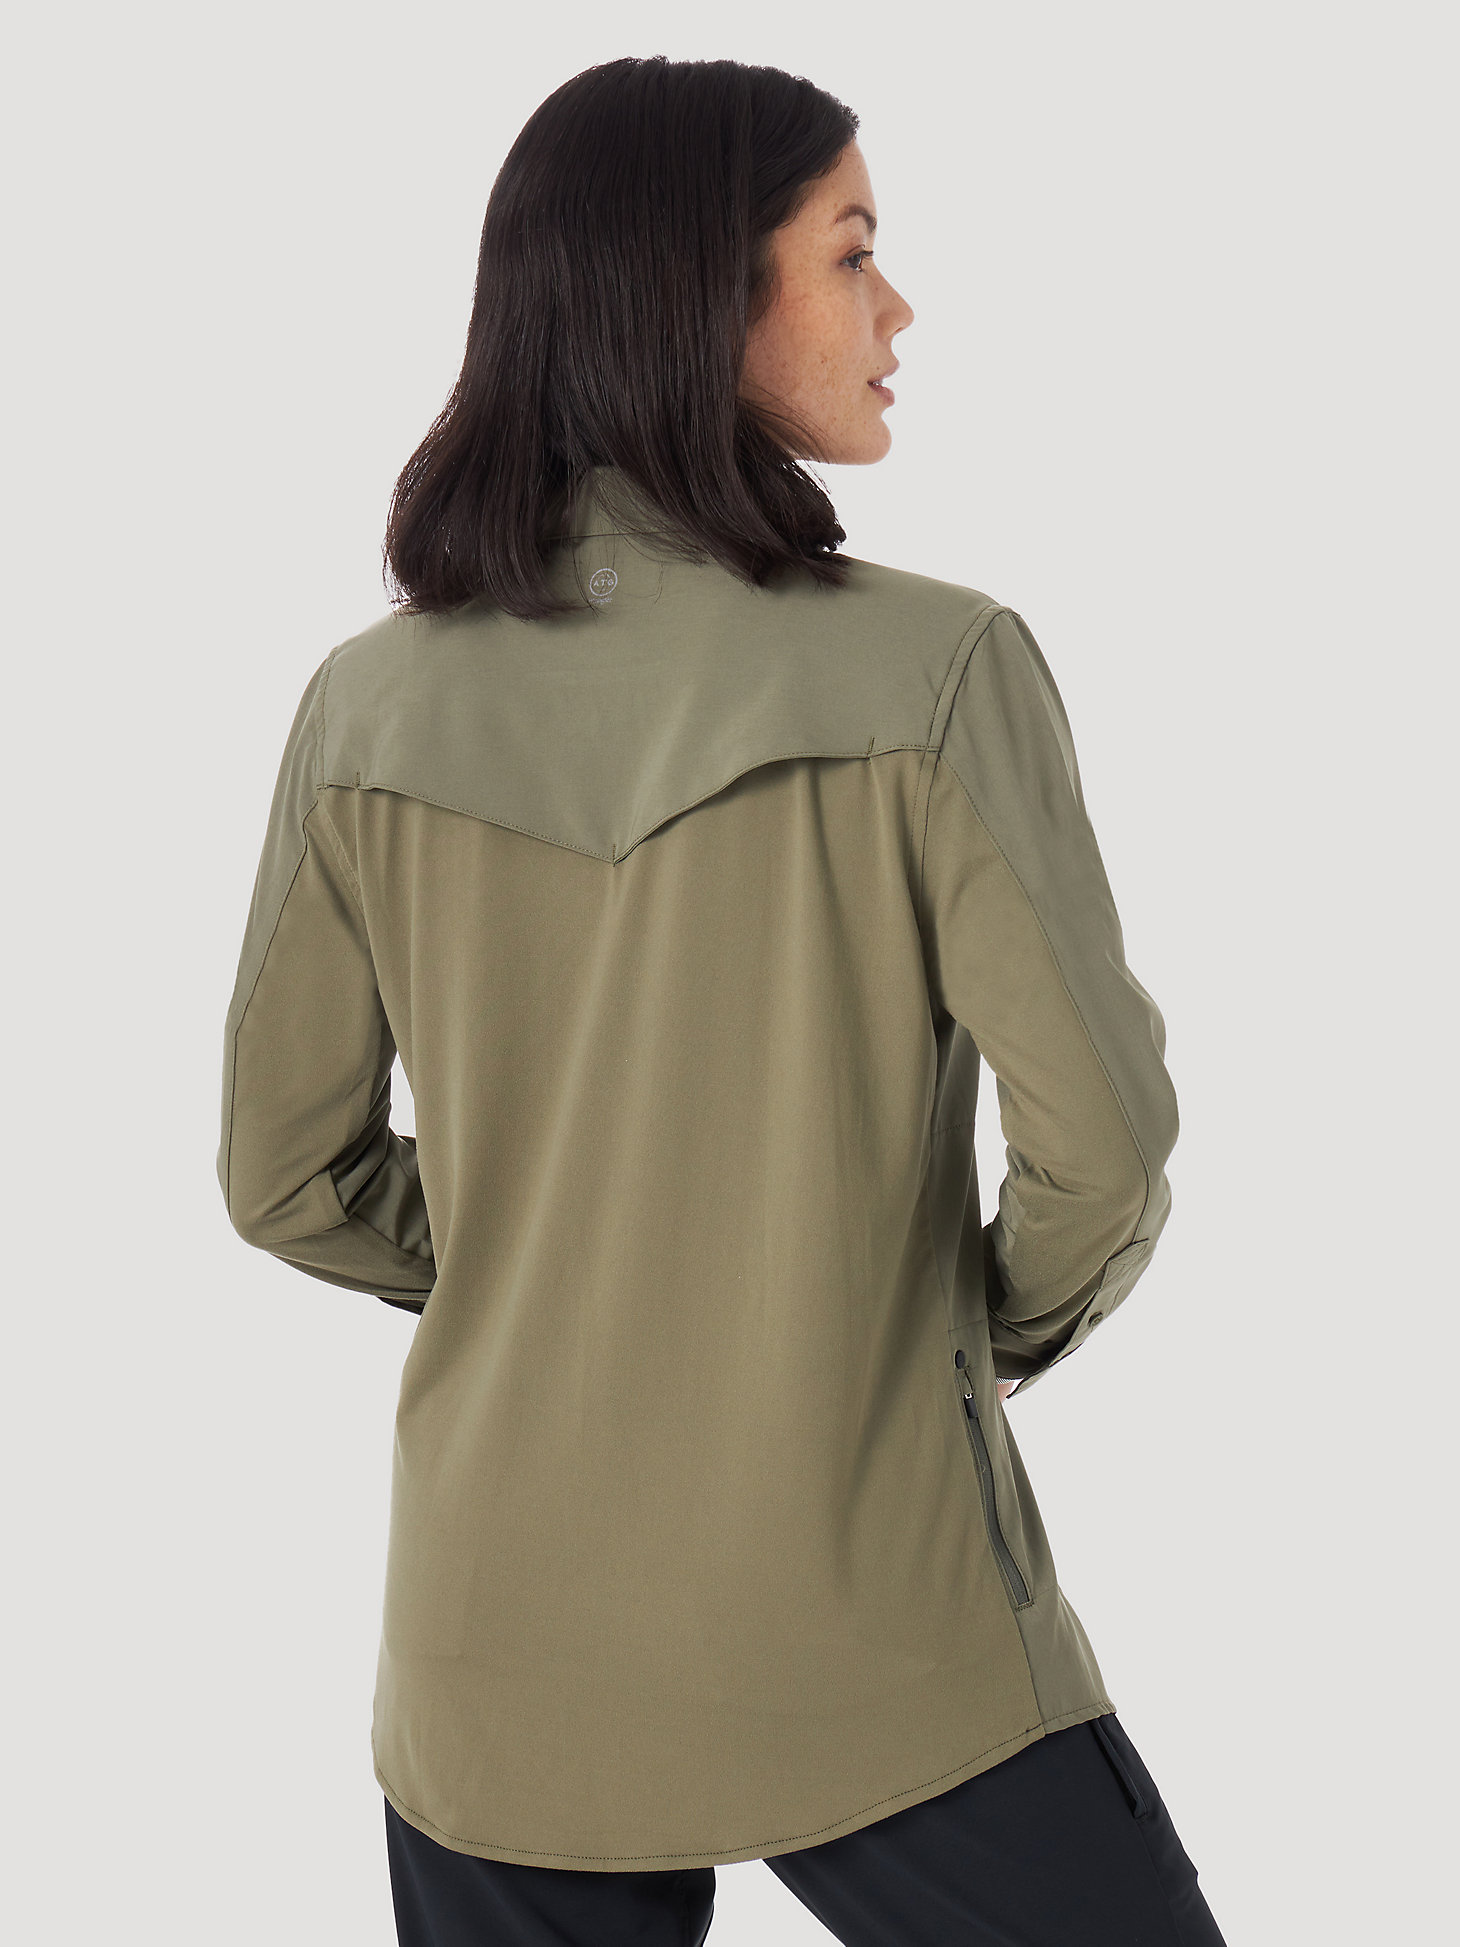 ATG by Wrangler™ Women's Mixed Material Shirt in Dusty Olive alternative view 1